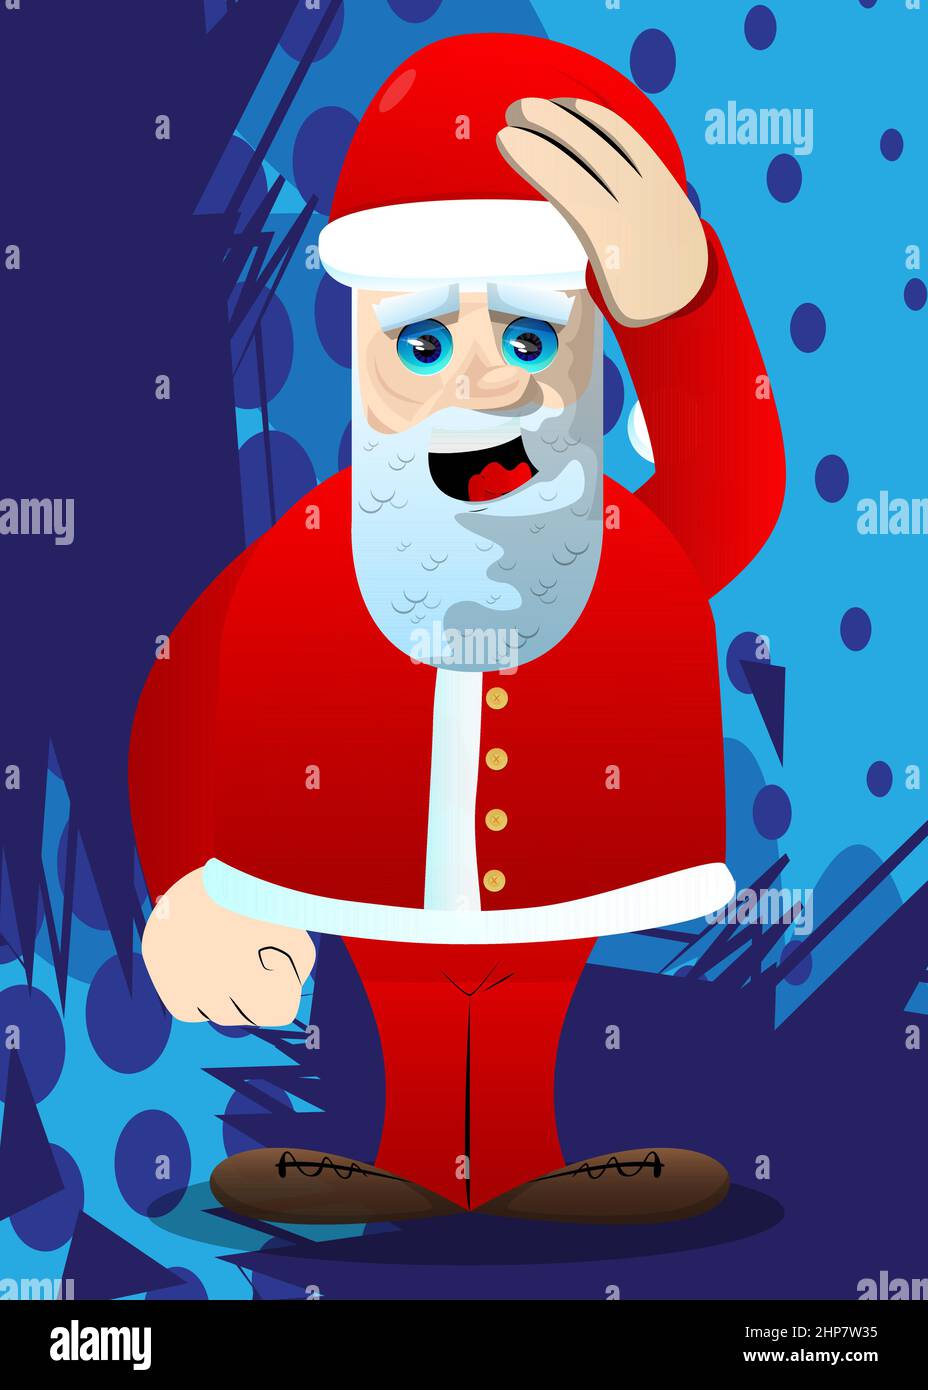 Santa Claus in his red clothes with white beard placing hand on head. Stock Vector